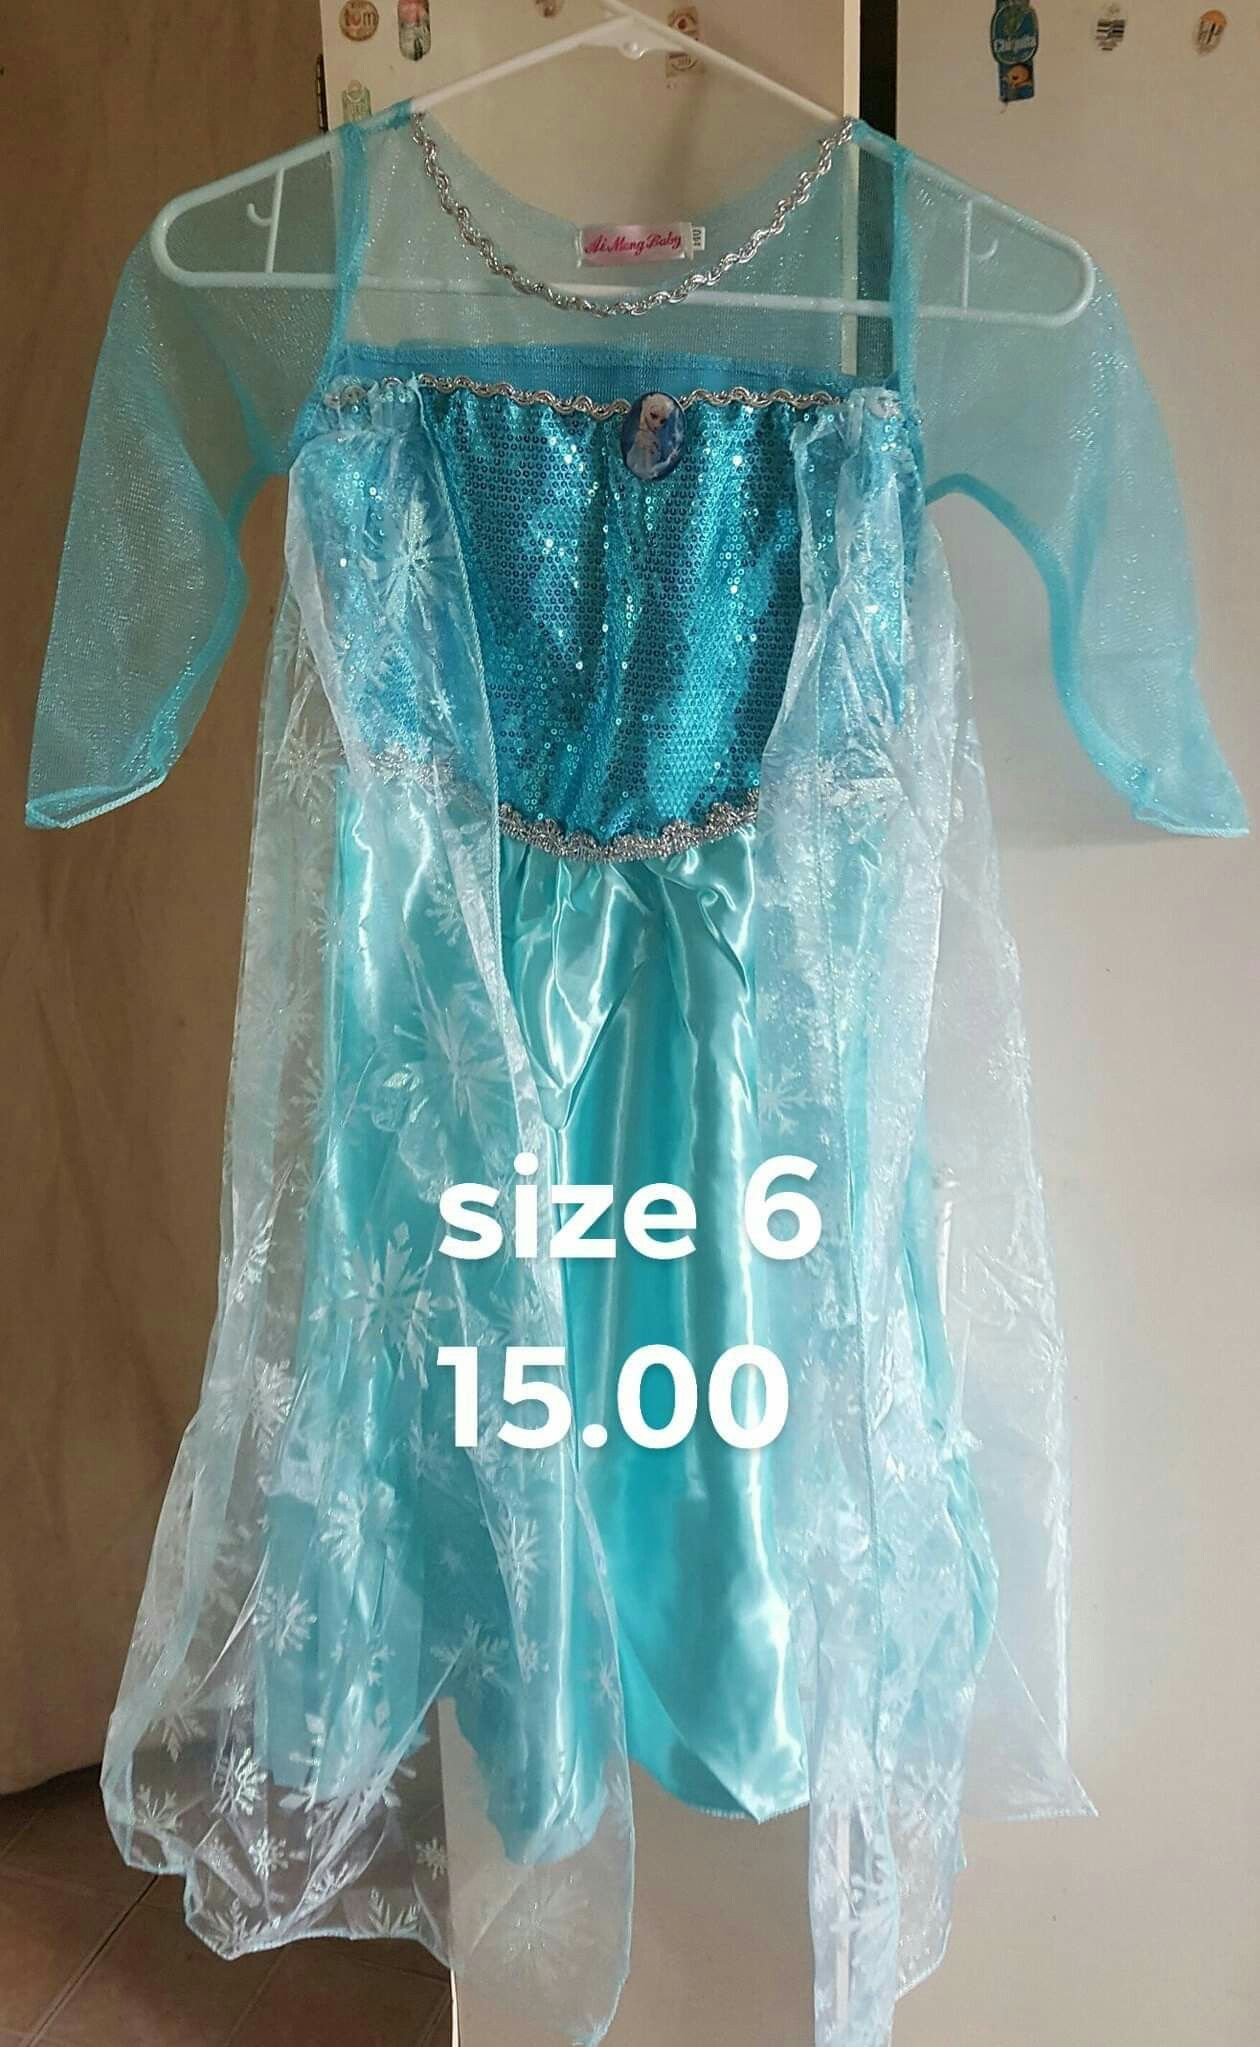 Princess Dresses Christmas Costume Party Children Kids Clothing the size 6 is a size 8